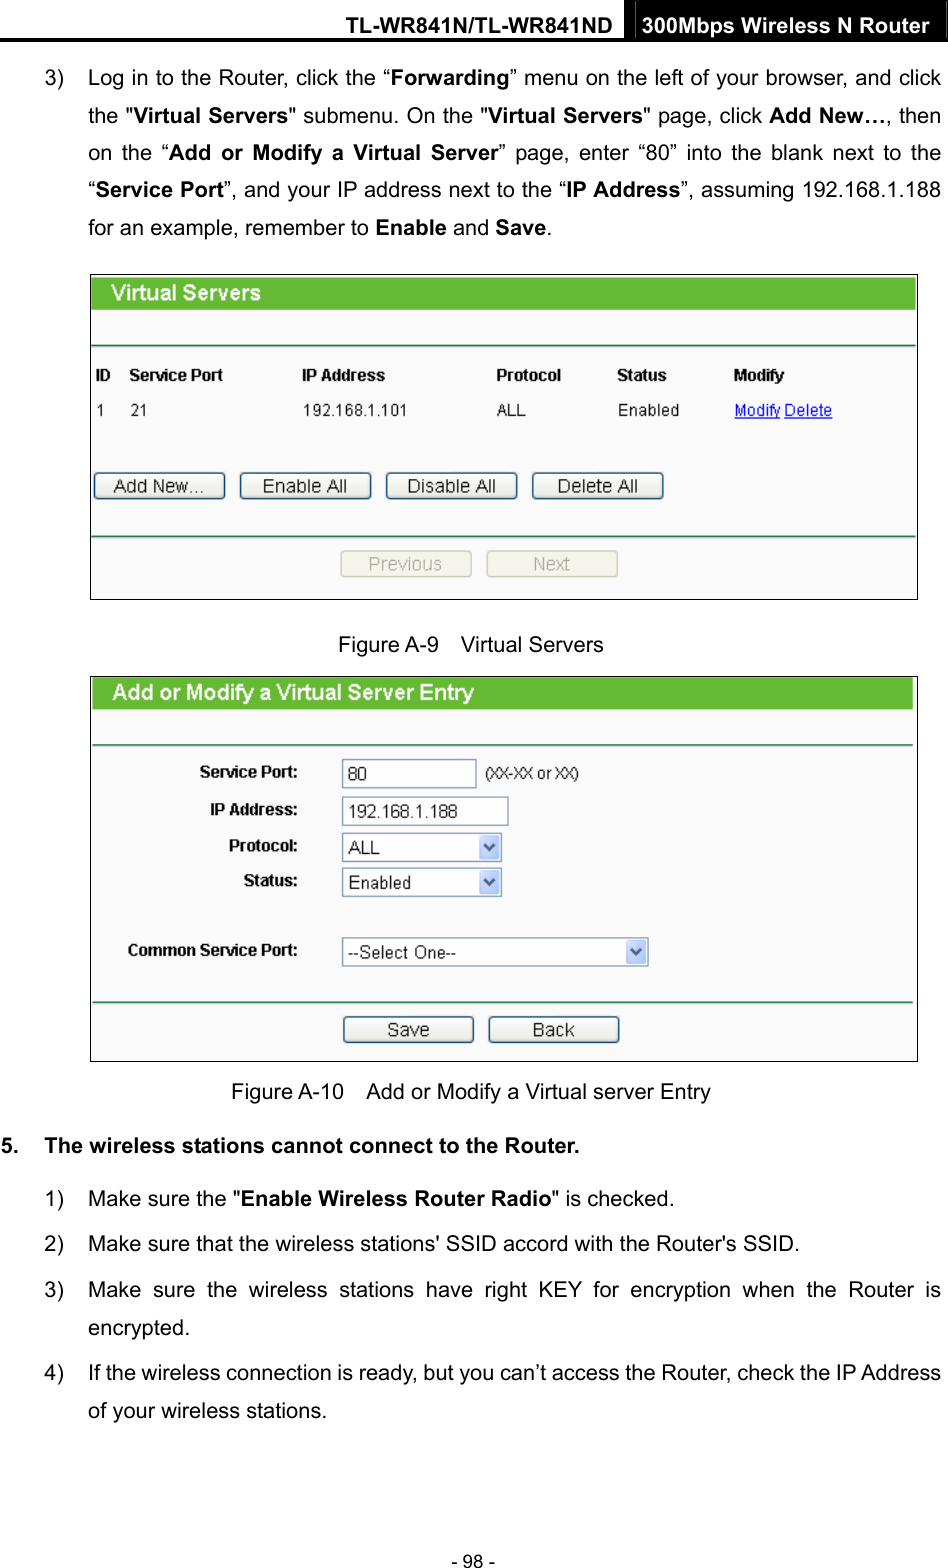 TL-WR841N/TL-WR841ND 300Mbps Wireless N Router - 98 - 3)  Log in to the Router, click the “Forwarding” menu on the left of your browser, and click the &quot;Virtual Servers&quot; submenu. On the &quot;Virtual Servers&quot; page, click Add New…, then on the “Add or Modify a Virtual Server” page, enter “80” into the blank next to the “Service Port”, and your IP address next to the “IP Address”, assuming 192.168.1.188 for an example, remember to Enable and Save.  Figure A-9  Virtual Servers  Figure A-10    Add or Modify a Virtual server Entry 5.  The wireless stations cannot connect to the Router. 1)  Make sure the &quot;Enable Wireless Router Radio&quot; is checked. 2)  Make sure that the wireless stations&apos; SSID accord with the Router&apos;s SSID. 3)  Make sure the wireless stations have right KEY for encryption when the Router is encrypted. 4)  If the wireless connection is ready, but you can’t access the Router, check the IP Address of your wireless stations. 